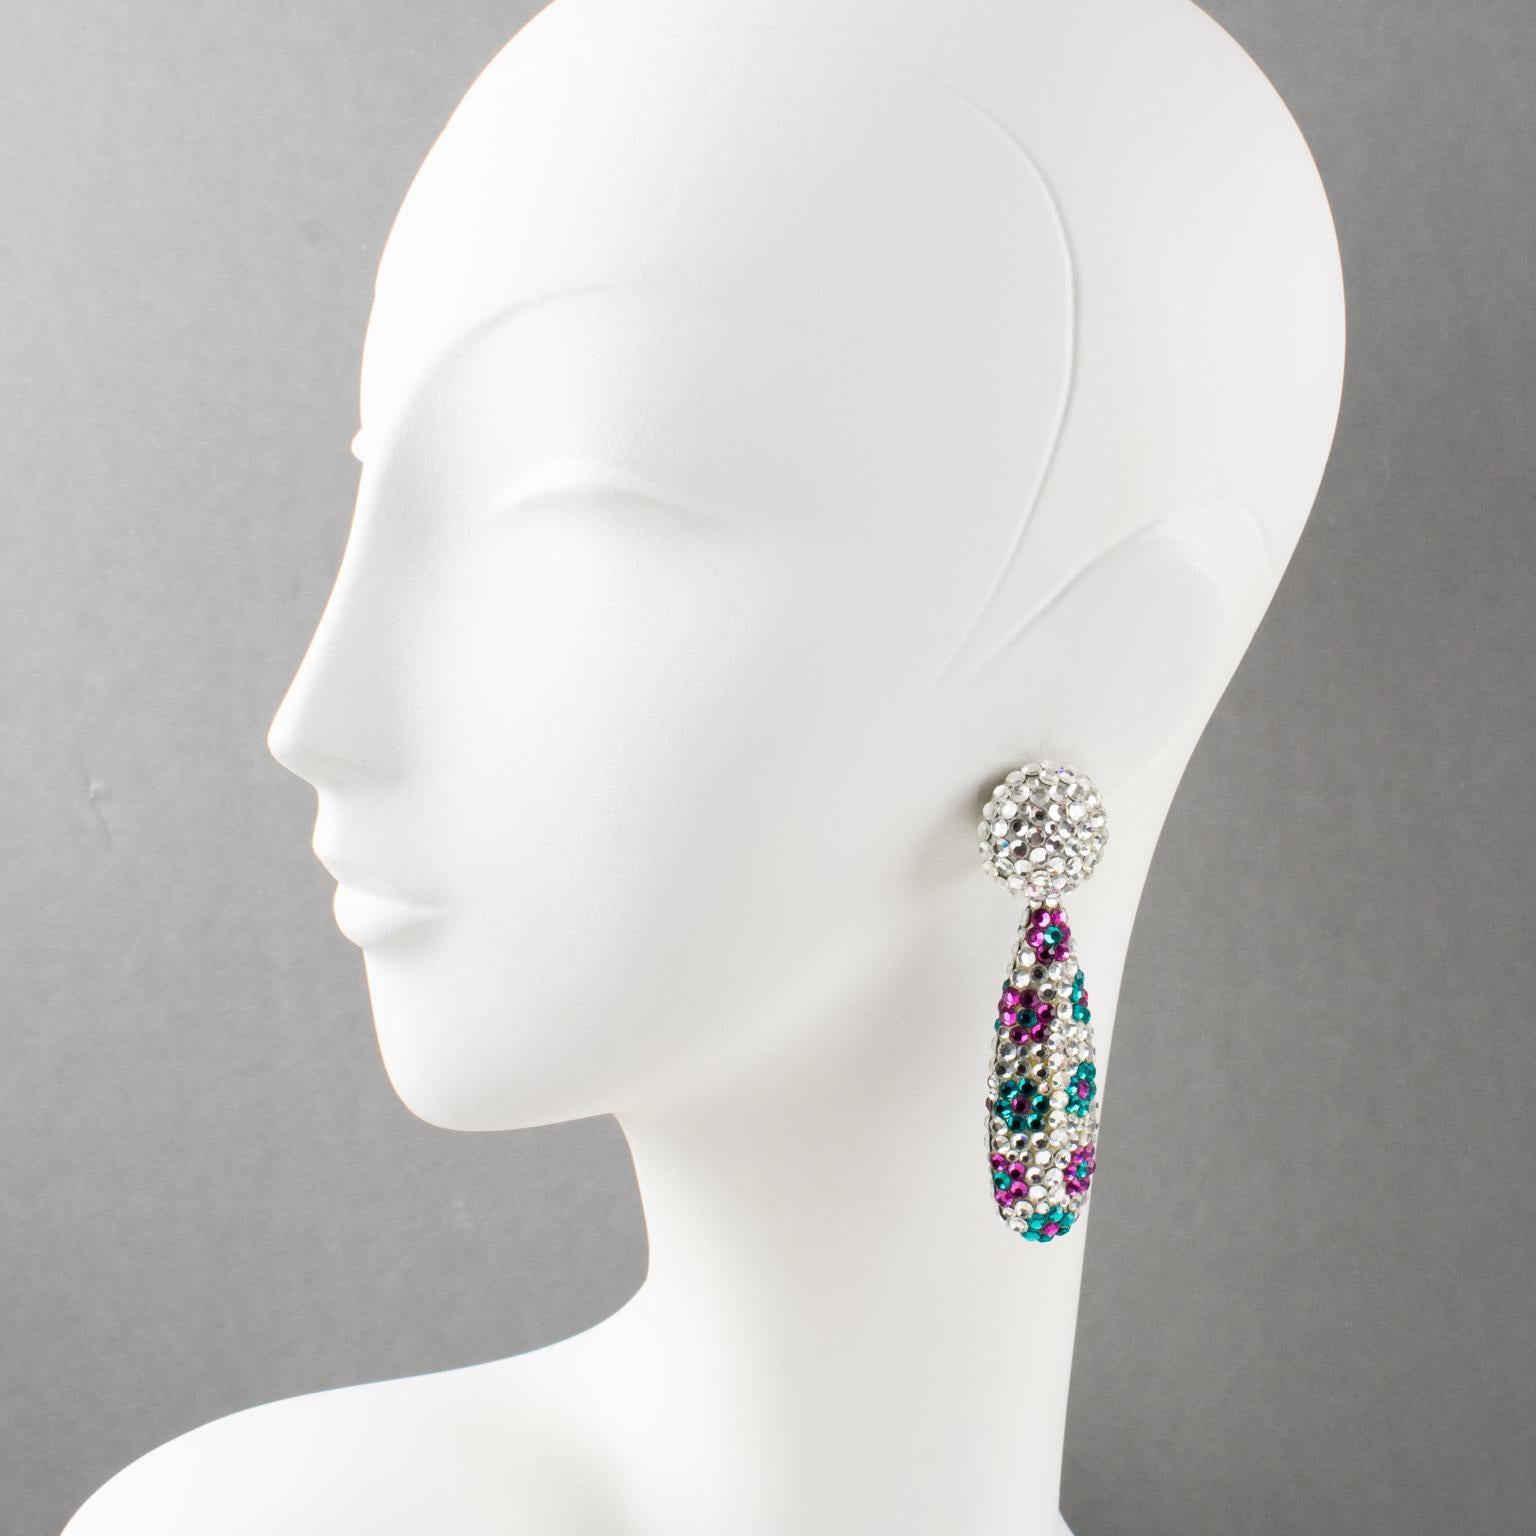 Richard Kerr designed these fabulous clip-on earrings in the 1980s. They are made up of his signature pave rhinestones. The set features a dangle geometric drop shape all covered with silver crystal rhinestones and complimented with a floral design